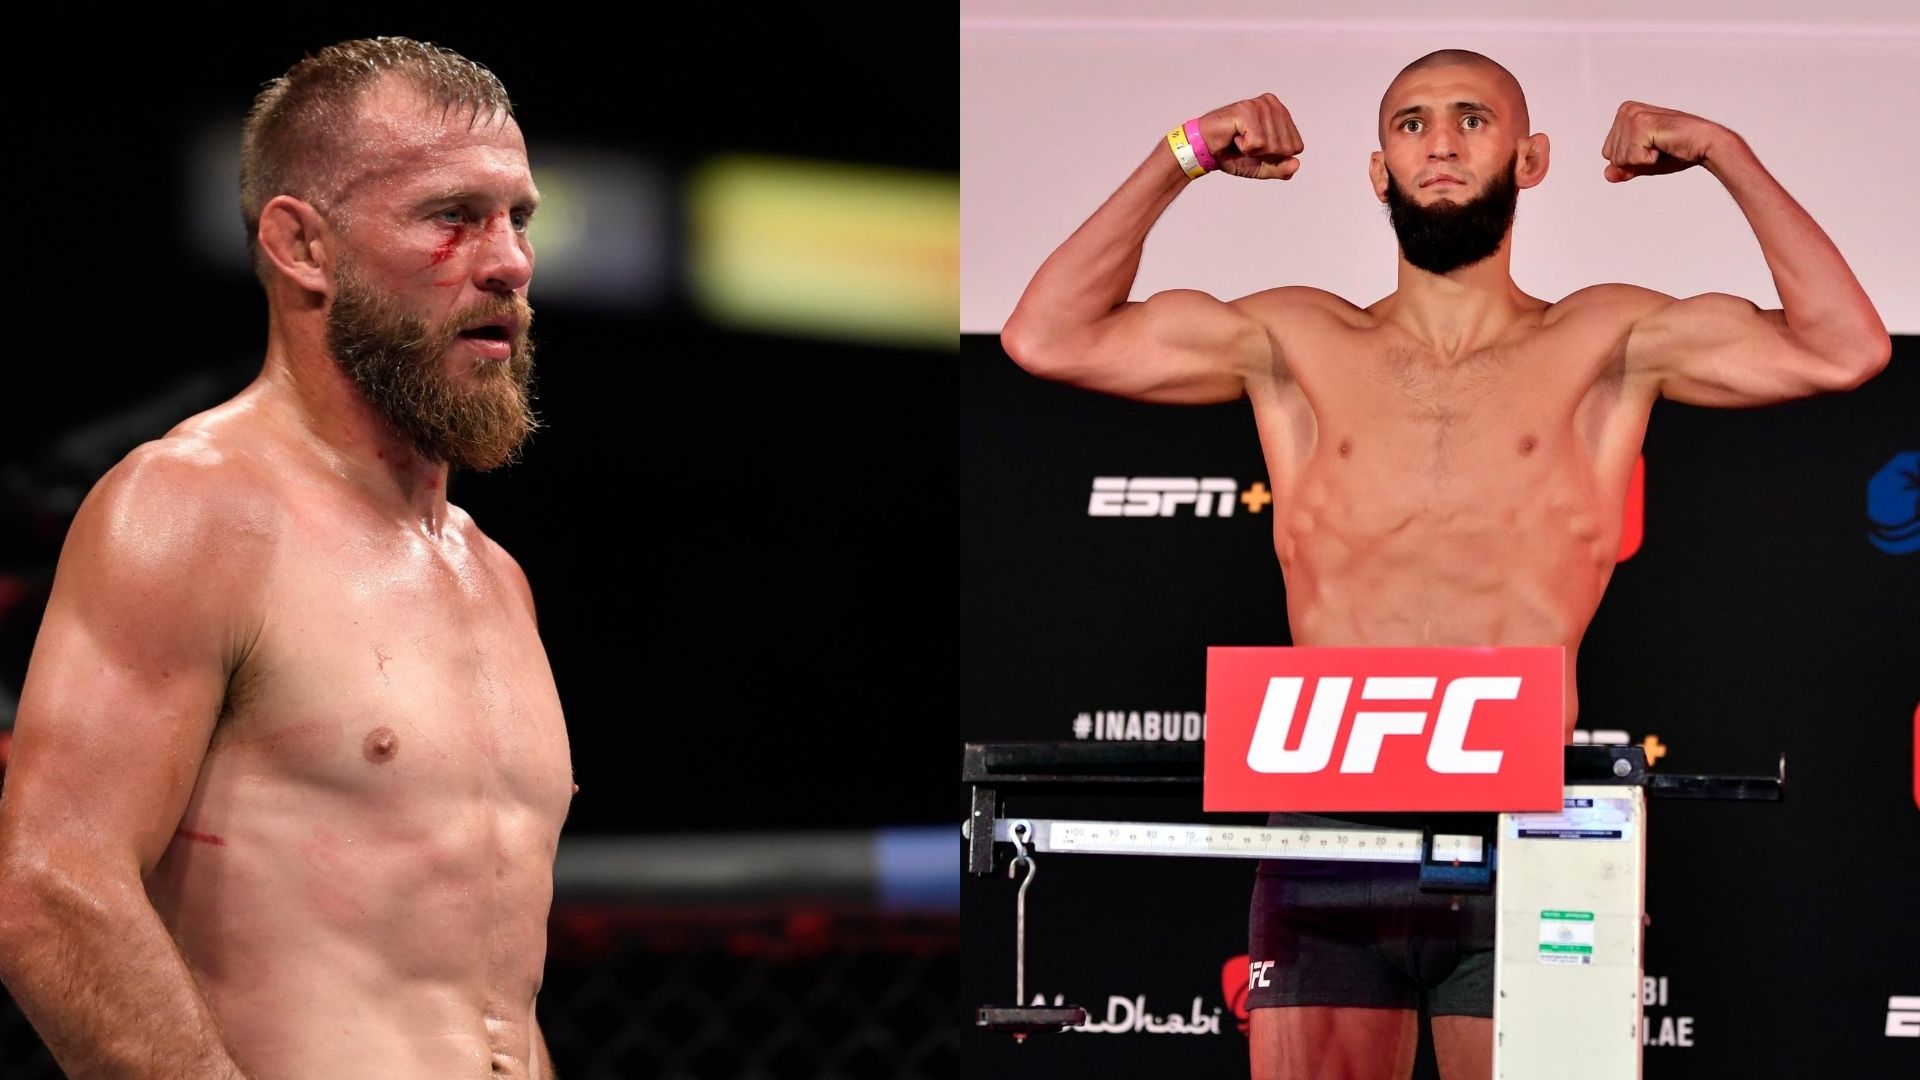 Khamzat Chimaev believed he could beat Donald Cerrone in his next fight